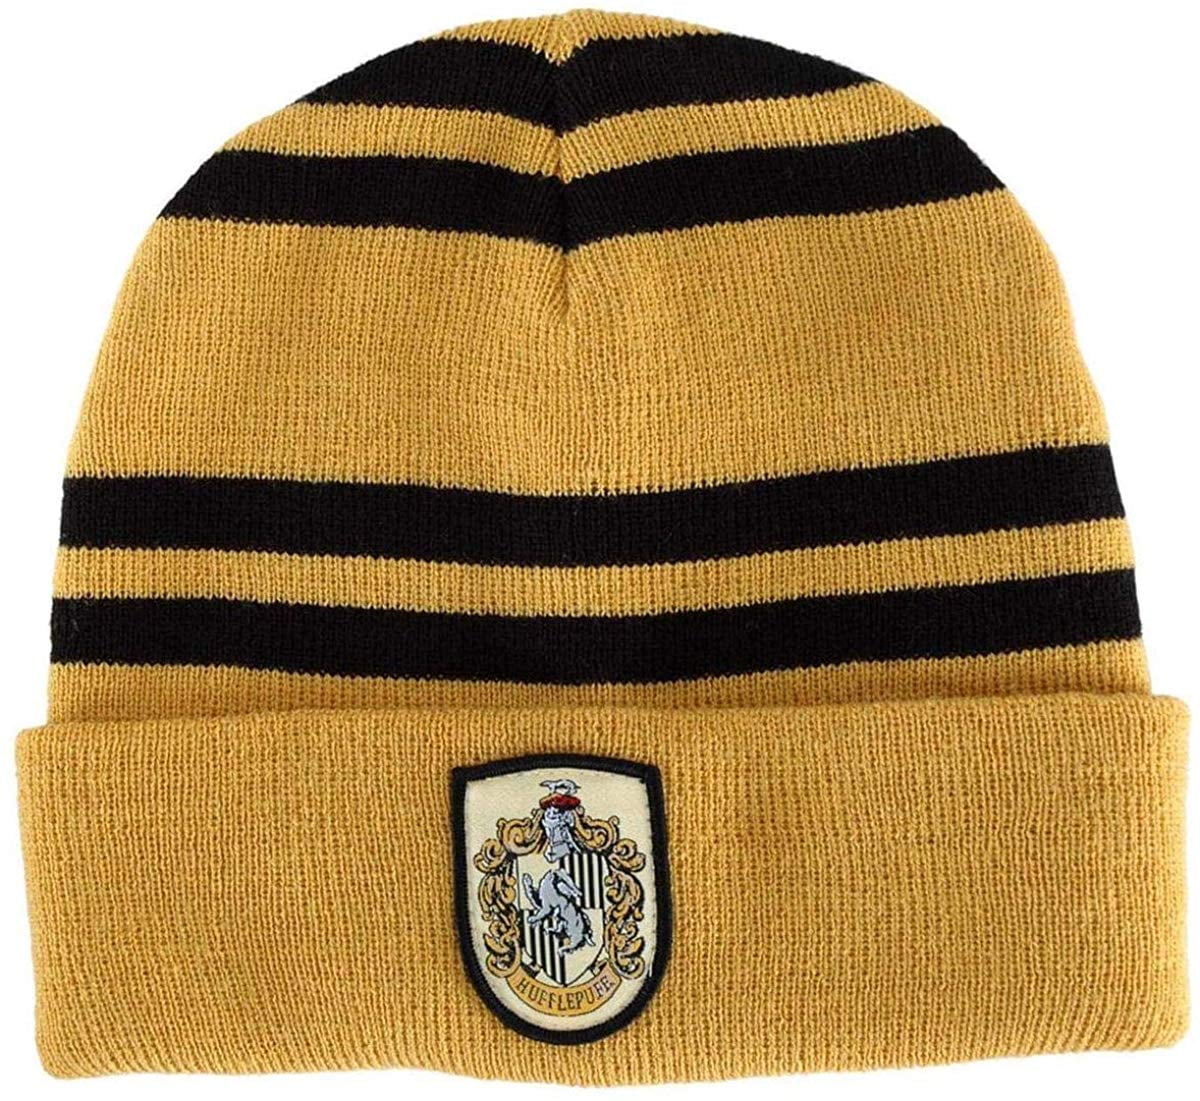 Harry Potter Gryffindor Thicken Knitted Hat Soft Warm Costume Cosplay US SELLER 